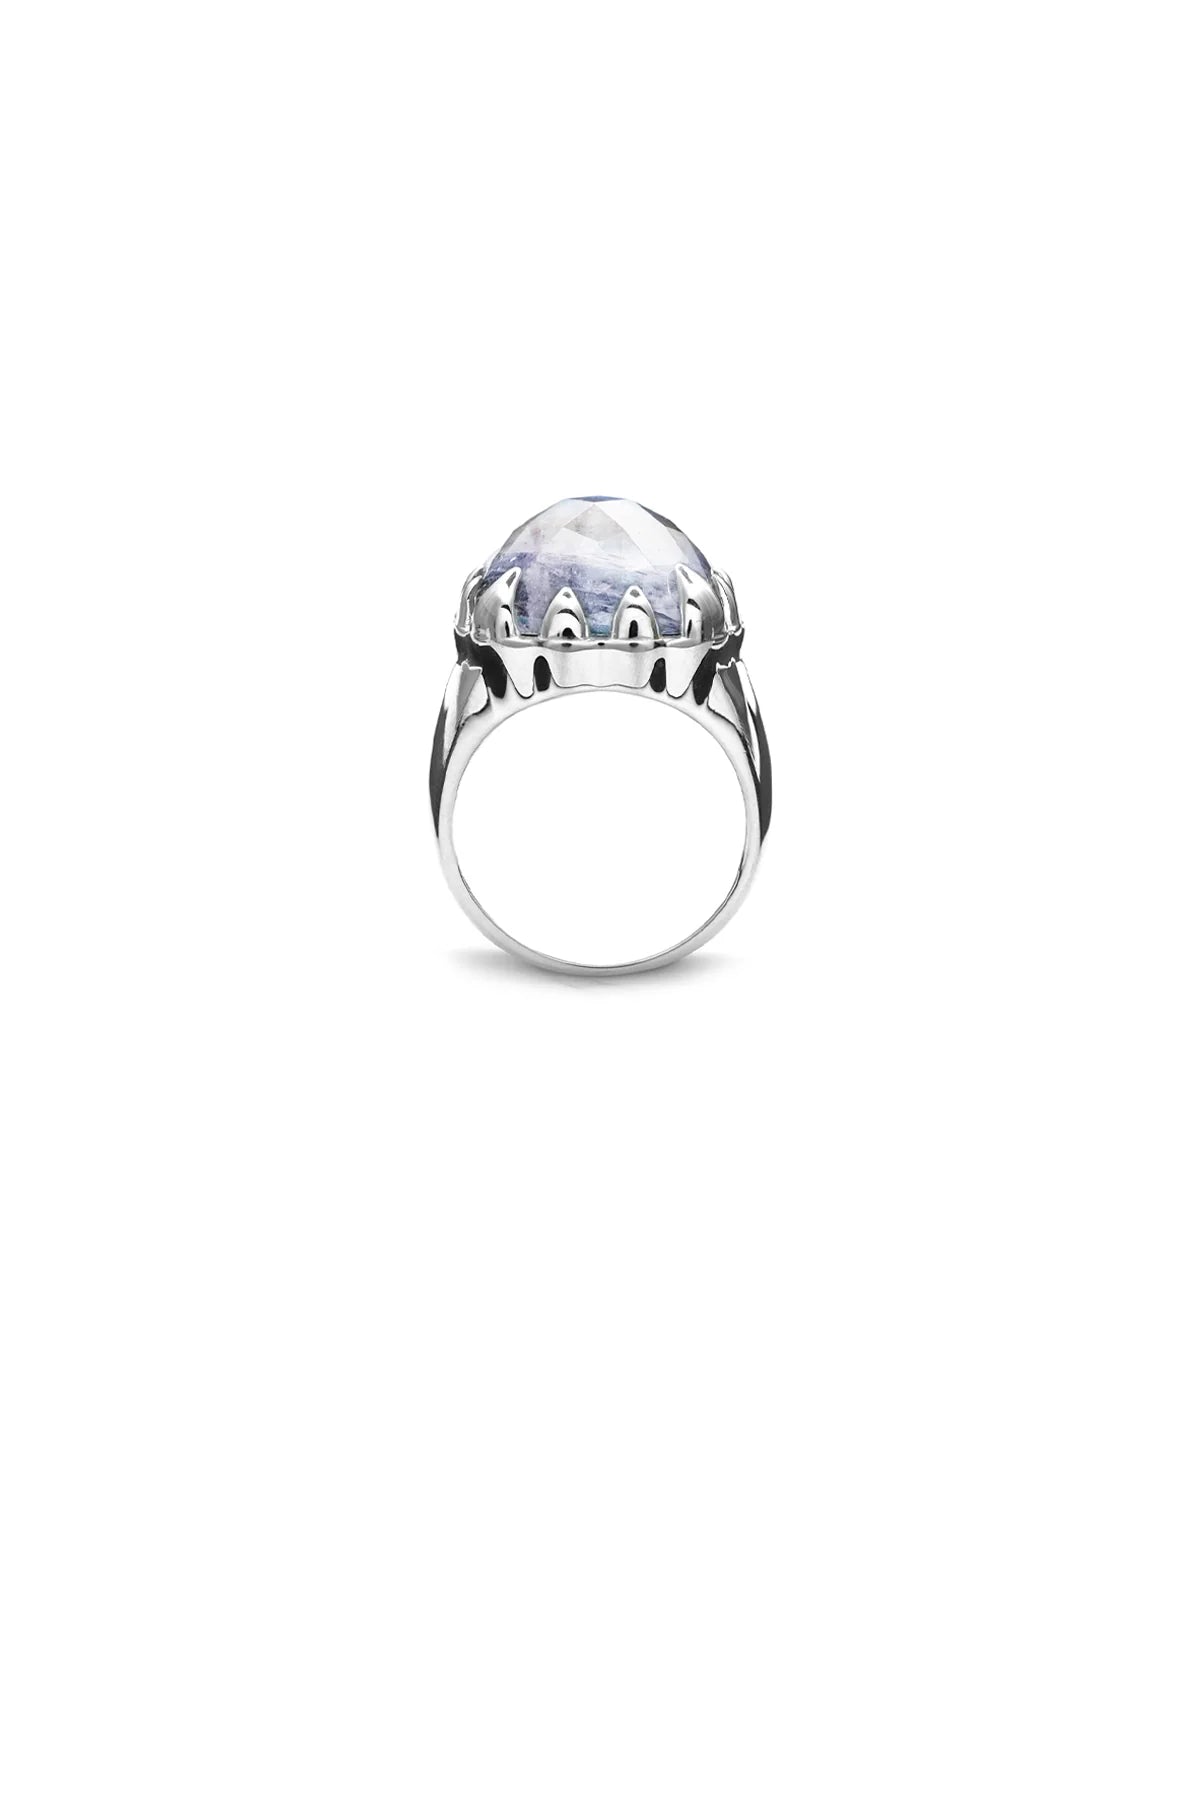 Stolen Girlfriends Club Claw Ring Moonstone